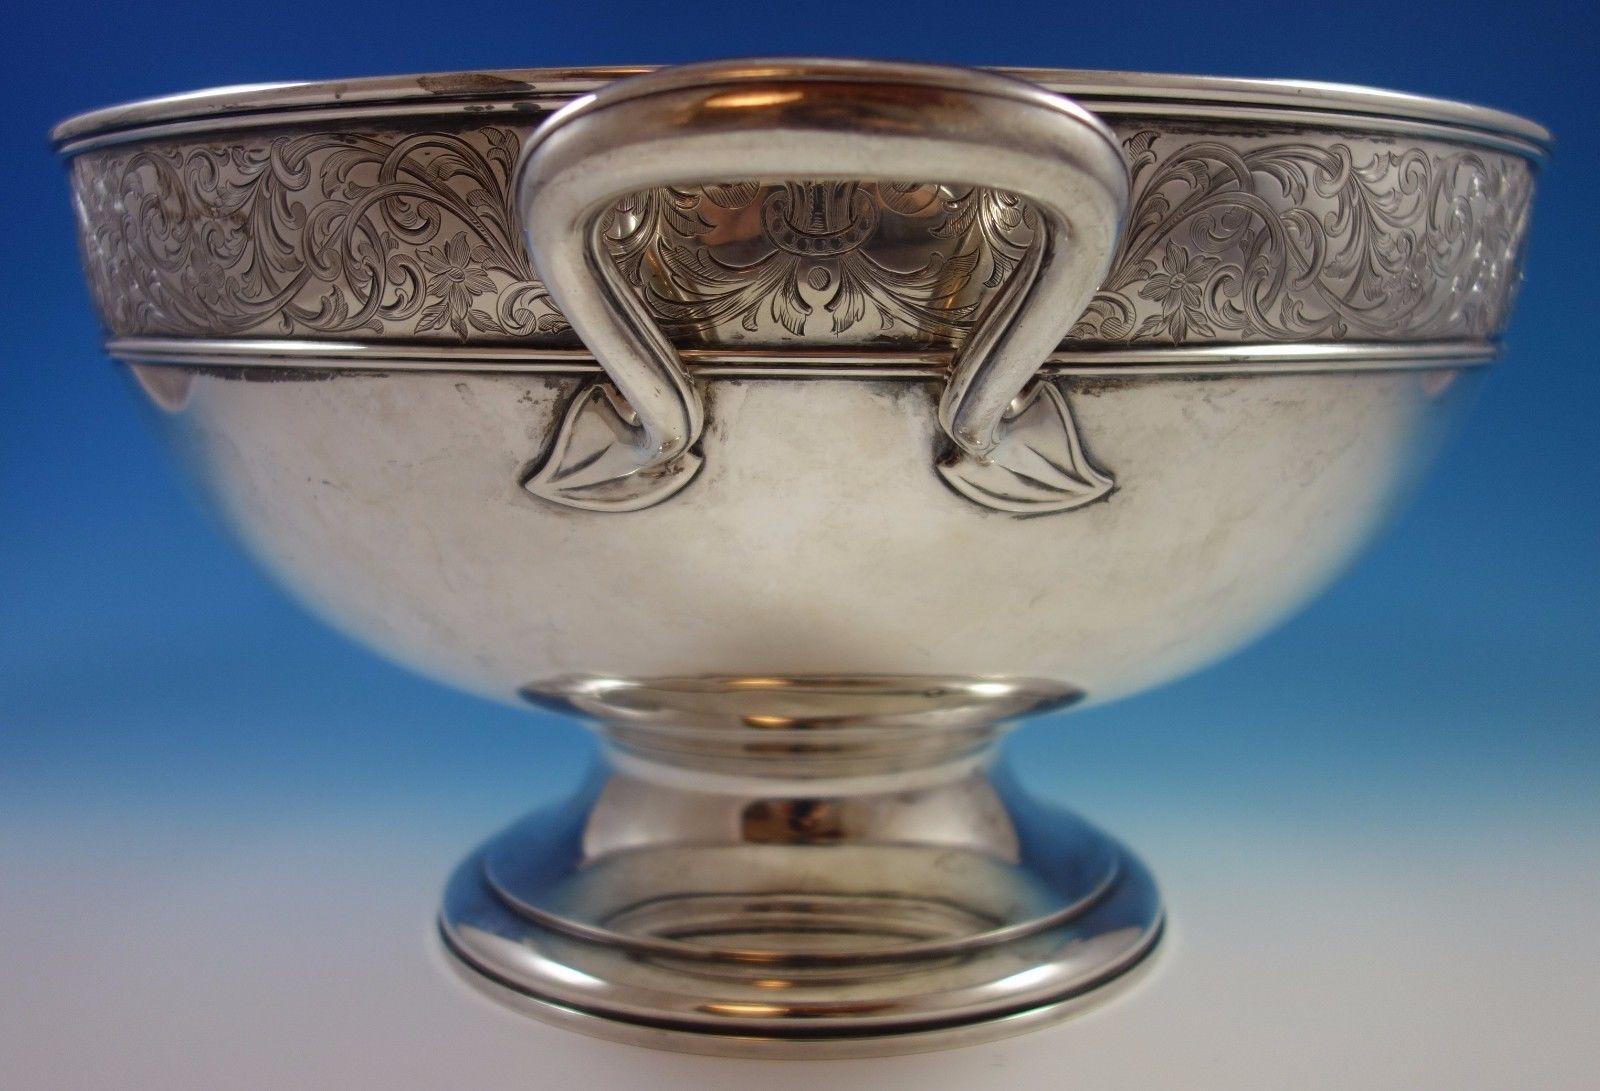 White paisley by Gorham
Finely made white paisley by Gorham sterling silver punch bowl. The piece has bright-cut scrollwork. It' s marked with custom order #4948 and #A2004. The bowl measures 8